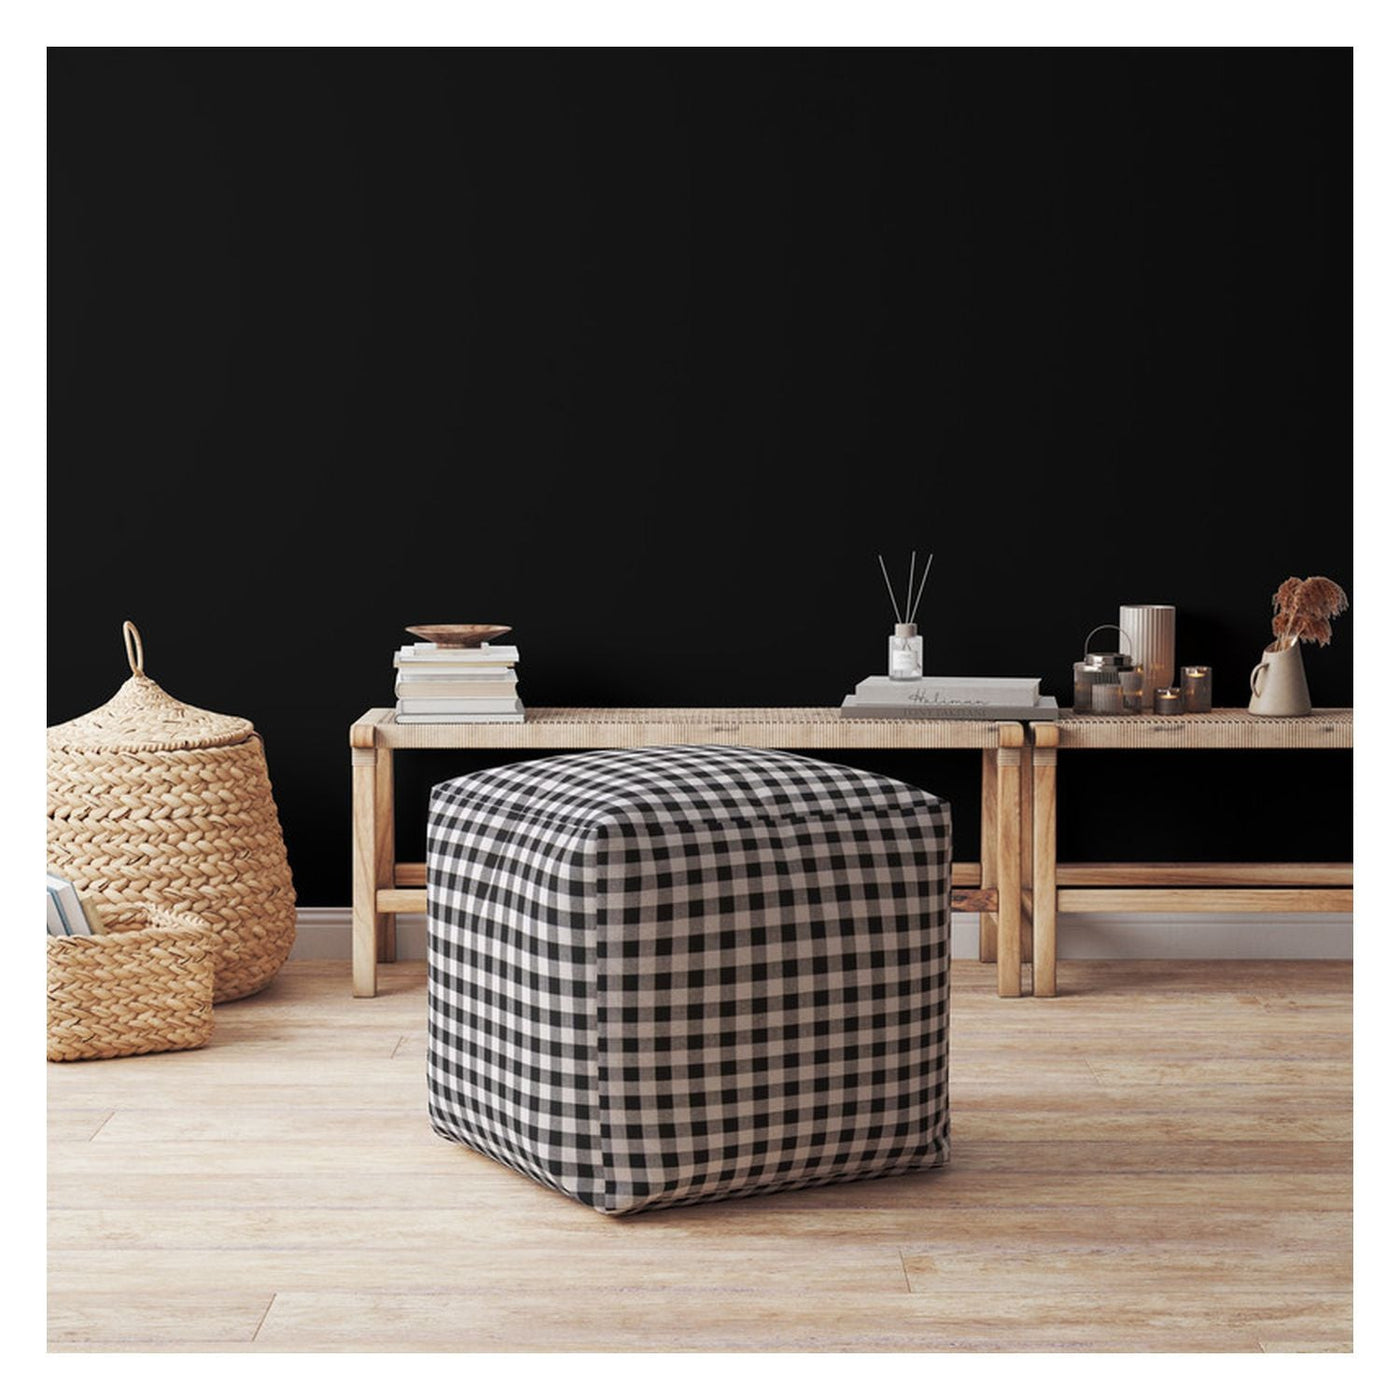 17’ Black And Gray Cotton Gingham Pouf Cover - Ottomans